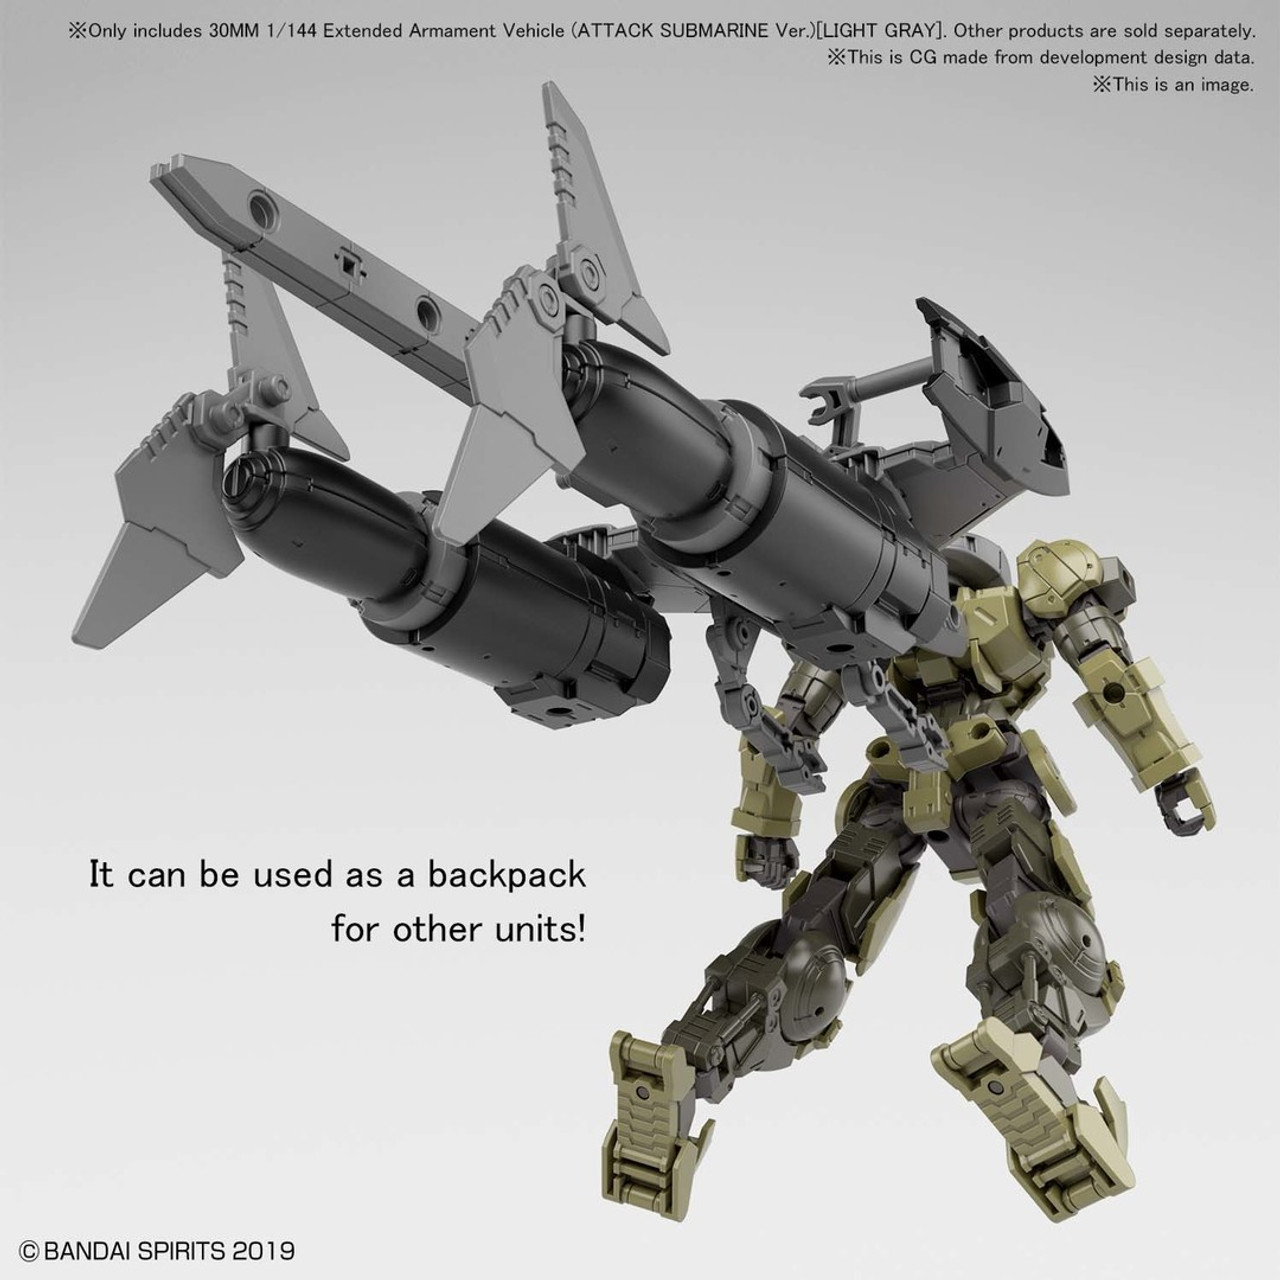 BAN2530626 Bandai Spirits 30 Minute Missions #05 1/144 Attack Submarine Light Gray Extended Armament Vehicle